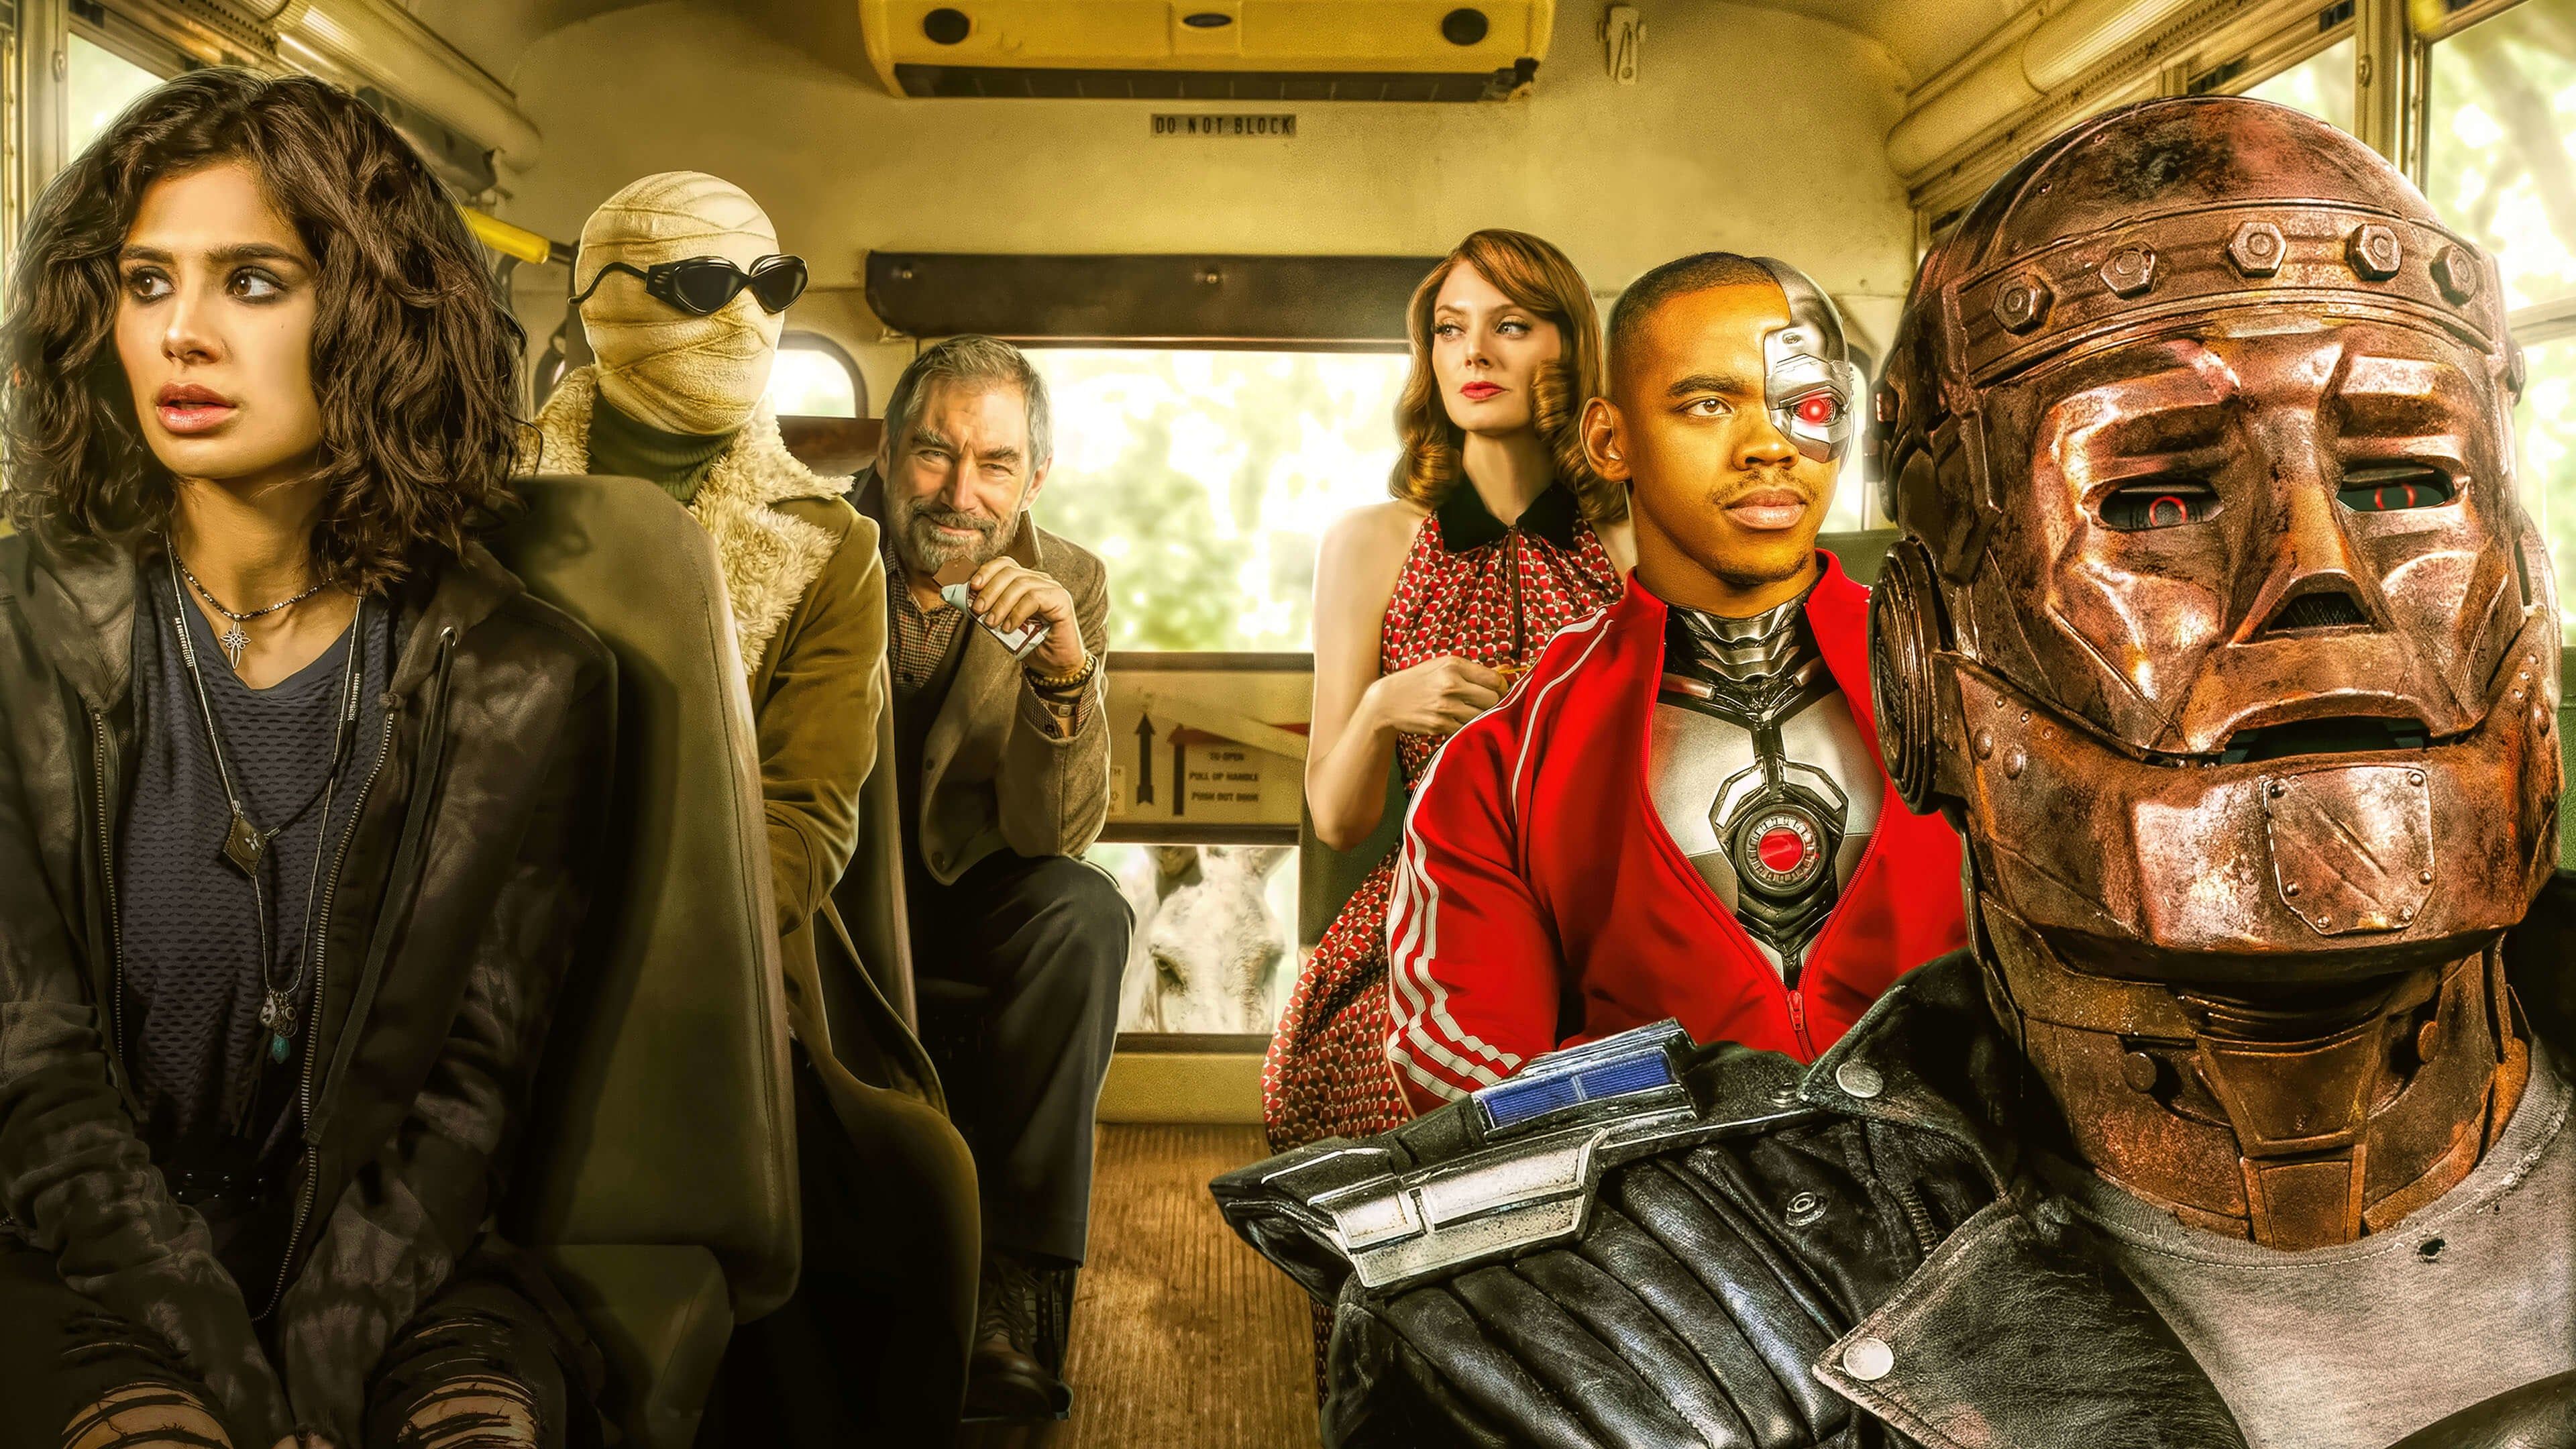 Doom Patrol Season 1 HD Tv Shows, 4k Wallpaper, Image, Background, Photo and Picture